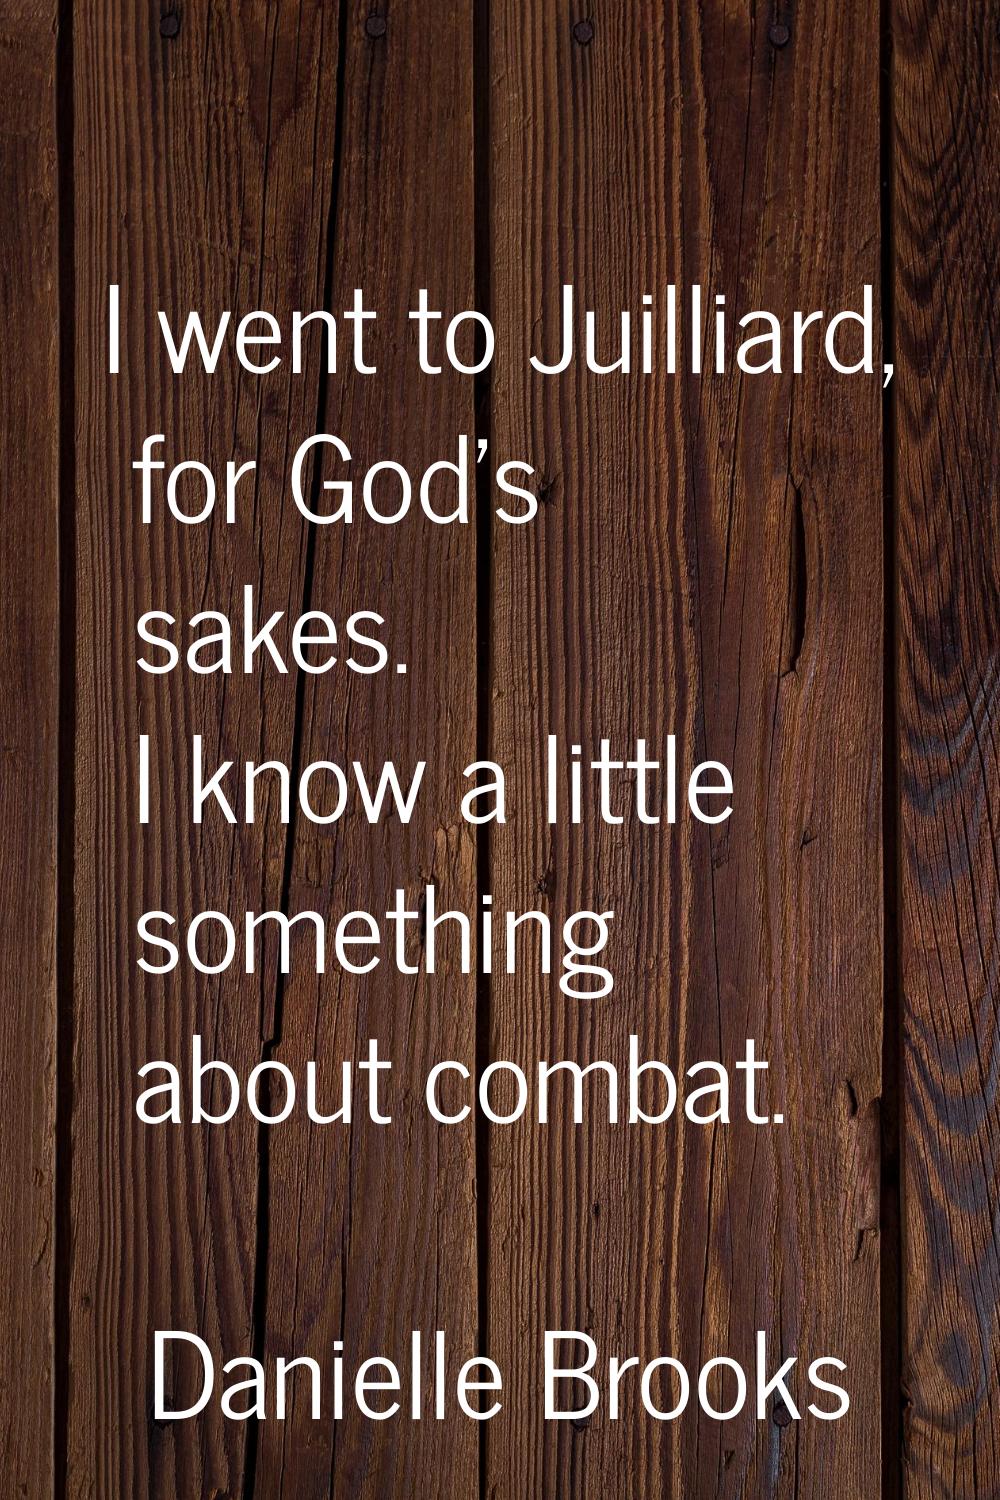 I went to Juilliard, for God's sakes. I know a little something about combat.